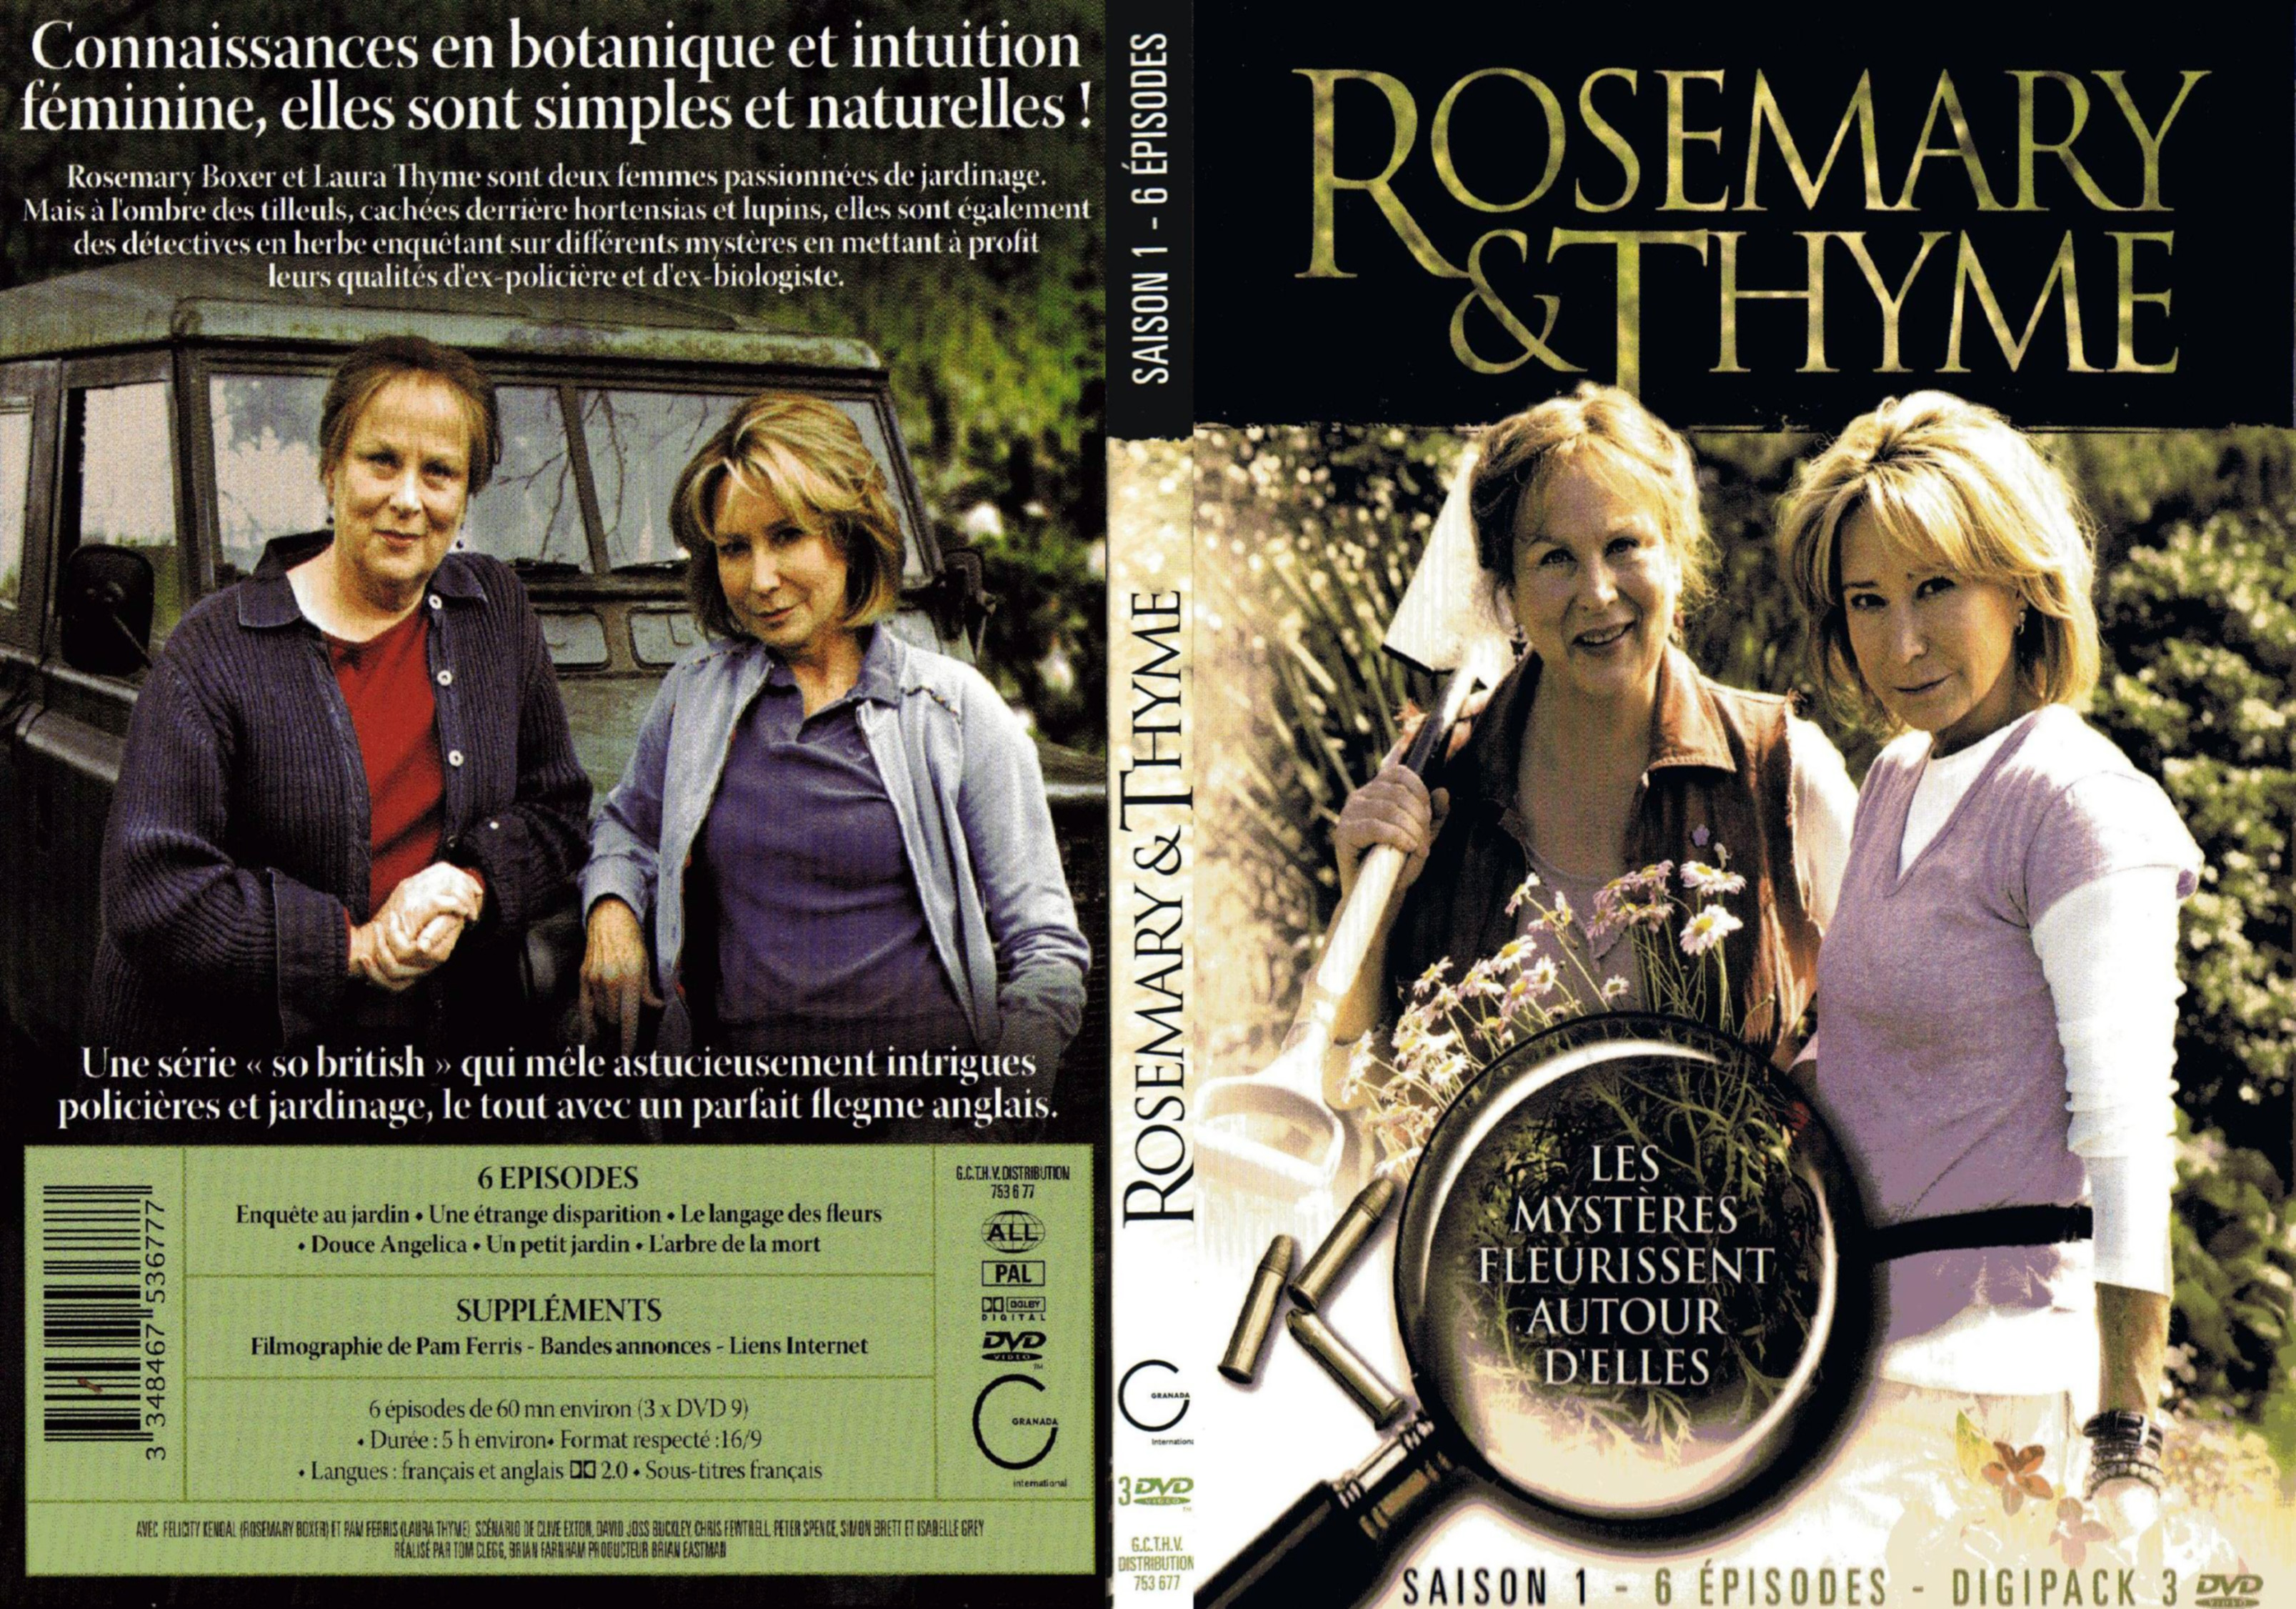 Jaquette DVD Rosemary & Thyme Saison 1